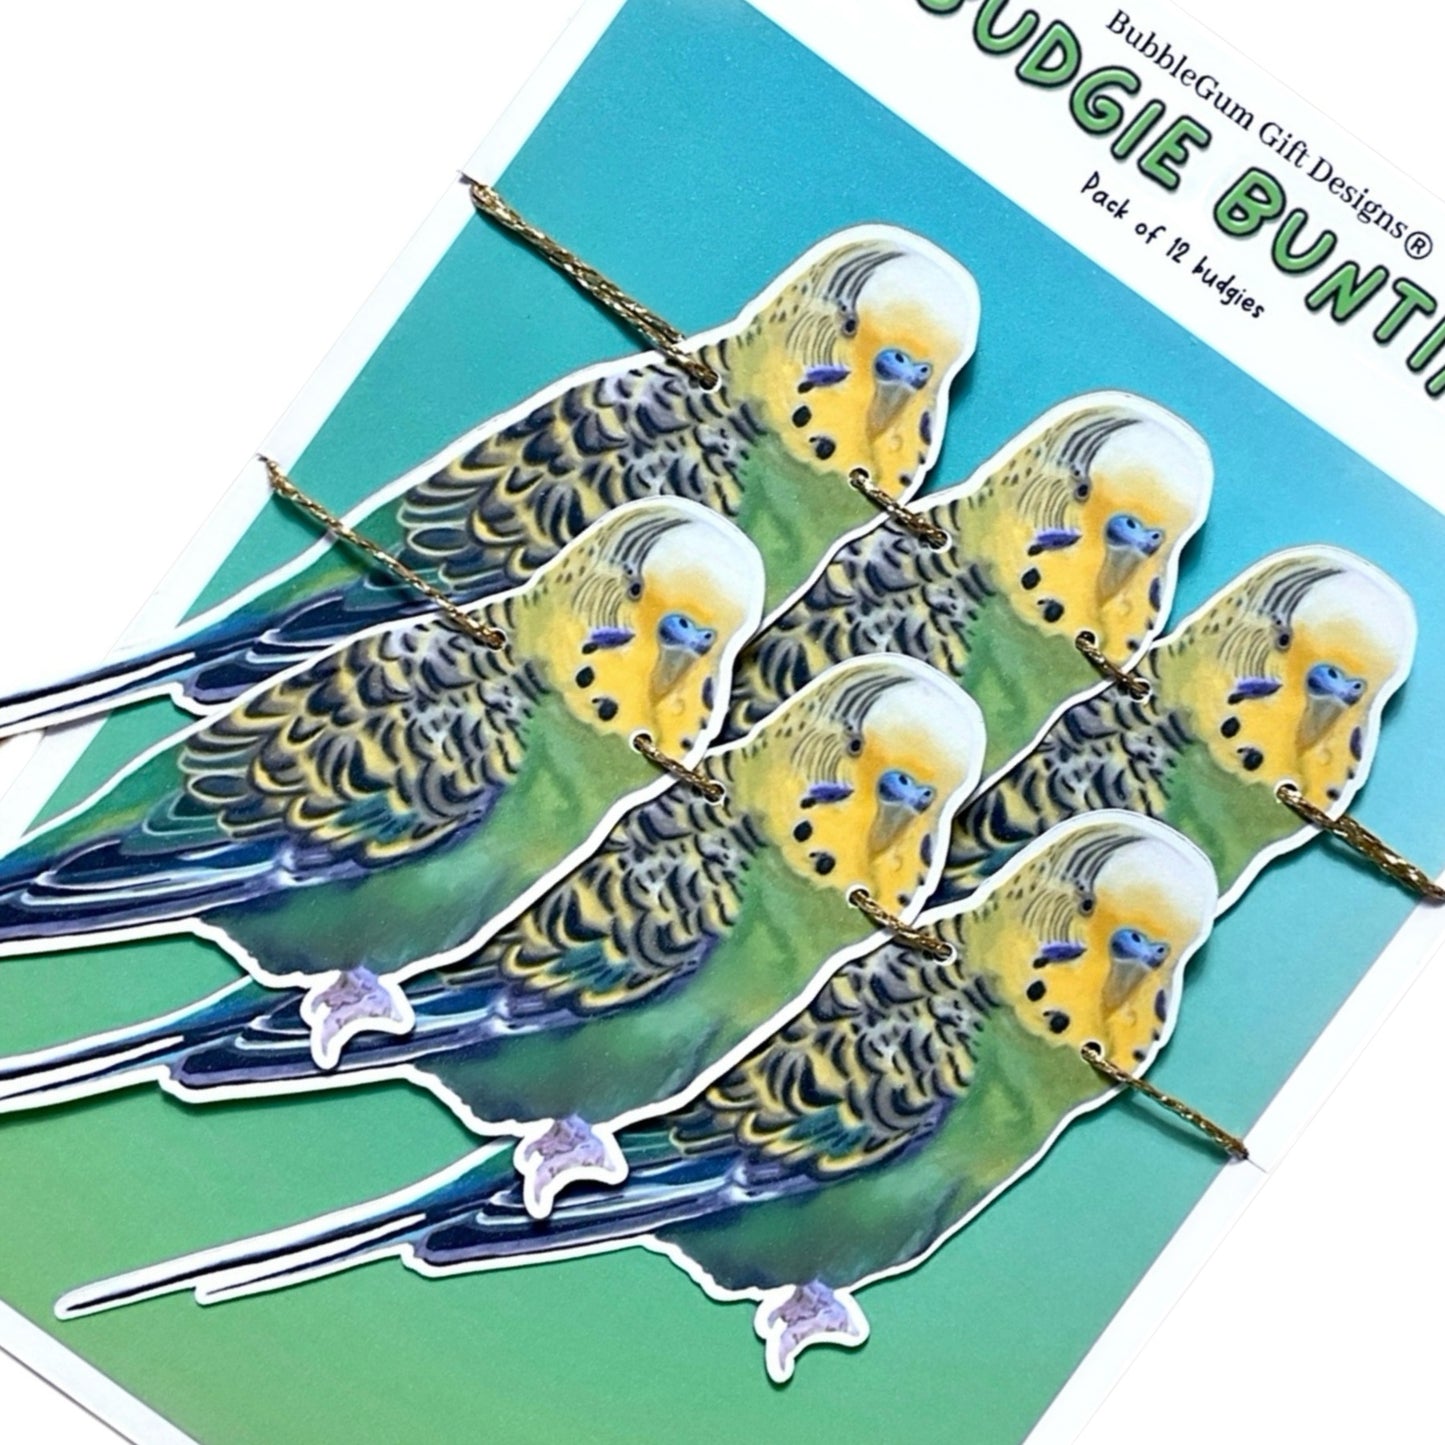 Budgie bunting green and yellow Parakeets cute kitschy pet budgie gift with gold twine long tailed feather seed eating cute birds